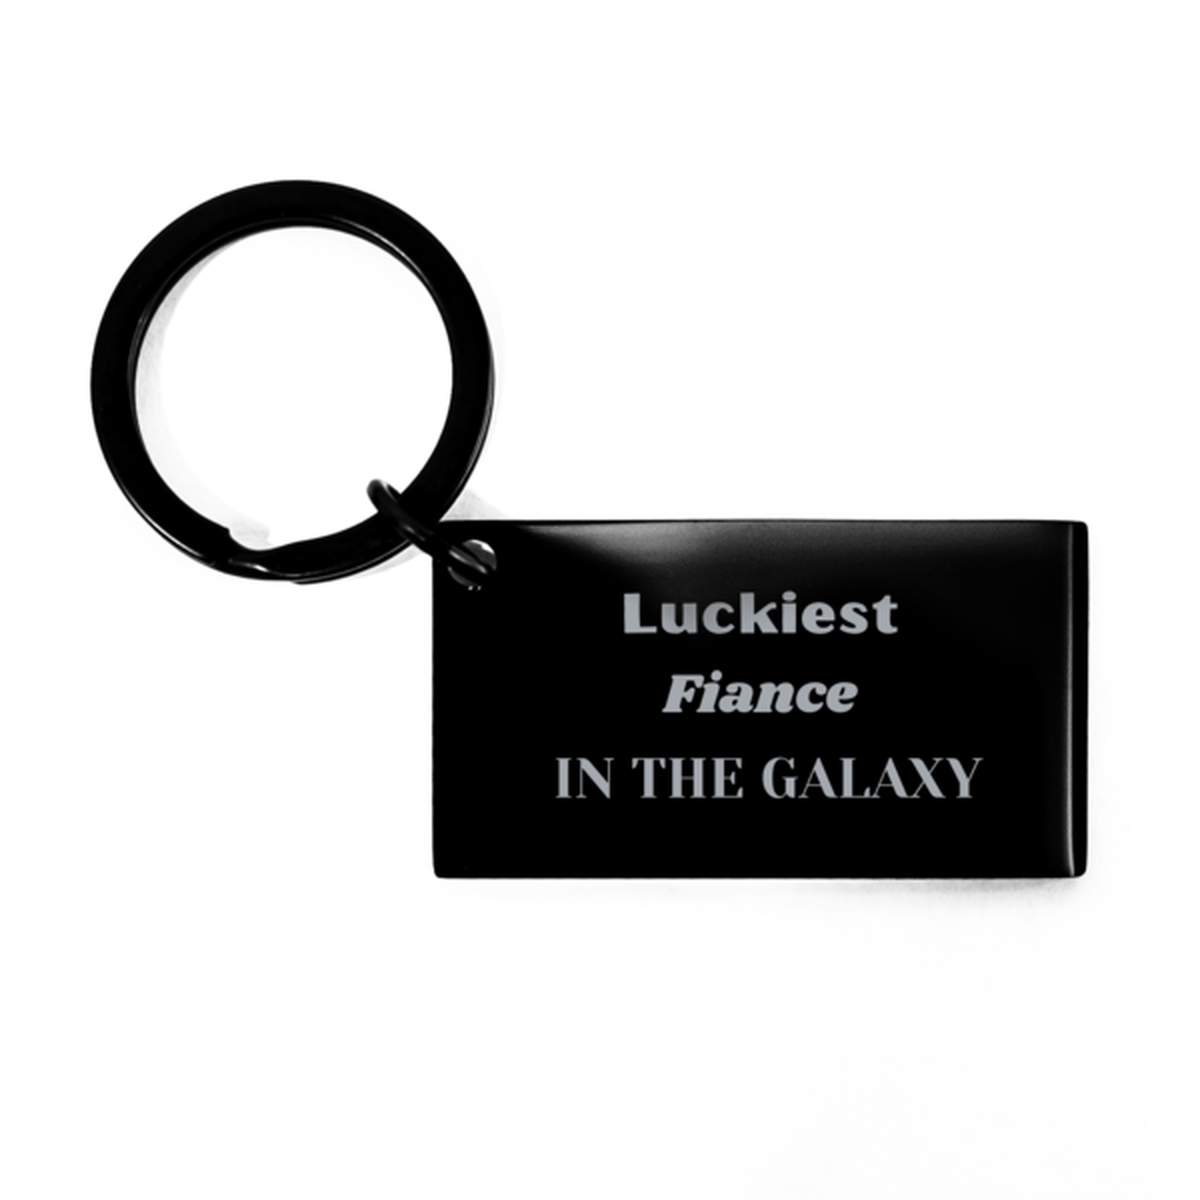 Luckiest Fiance in the Galaxy, To My Fiance Engraved Gifts, Christmas Fiance Keychain Gifts, X-mas Birthday Unique Gifts For Fiance Men Women